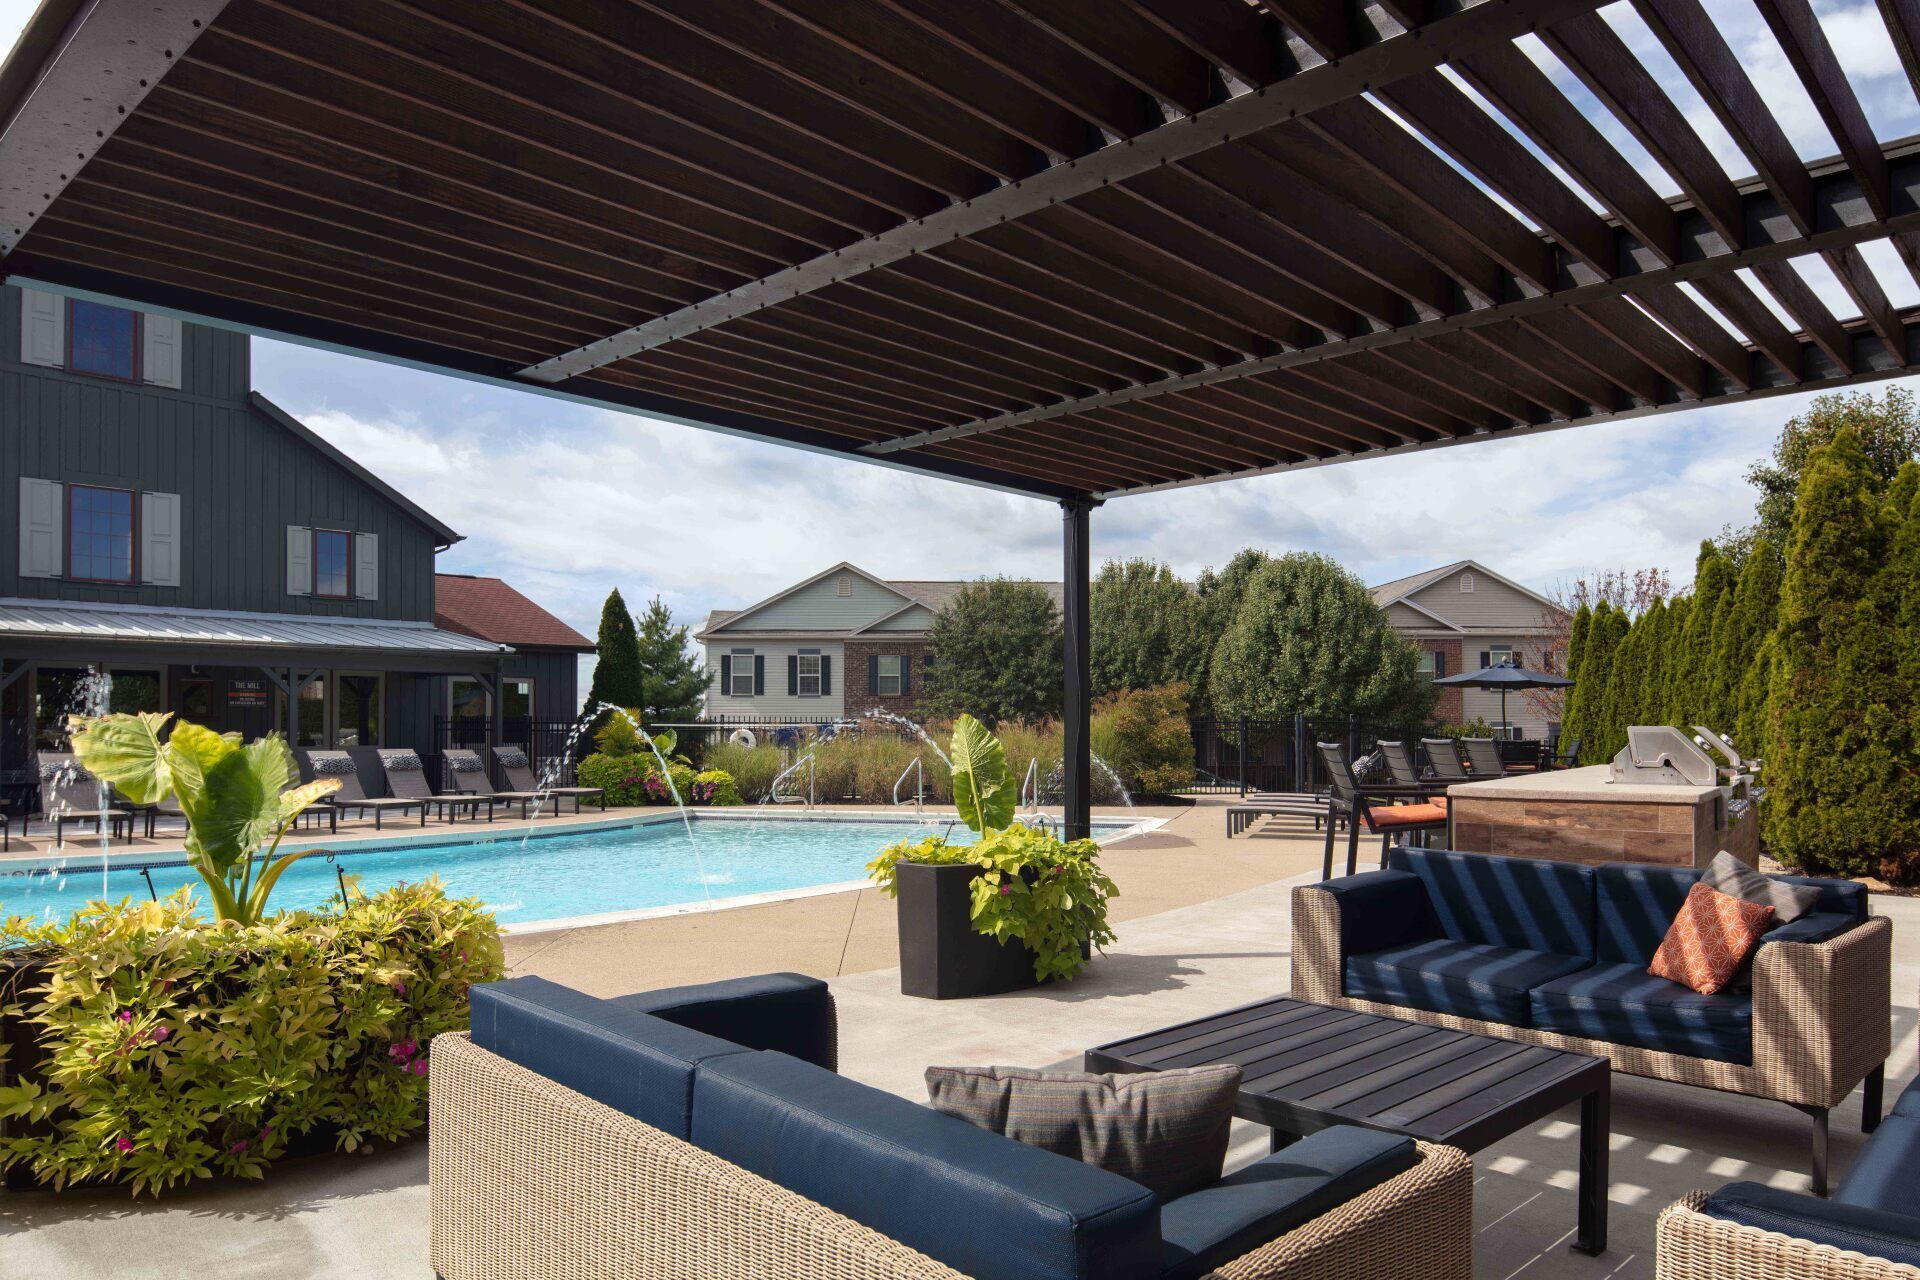 A patio area with a swimming pool and a pergola at The Mill at Georgetown.